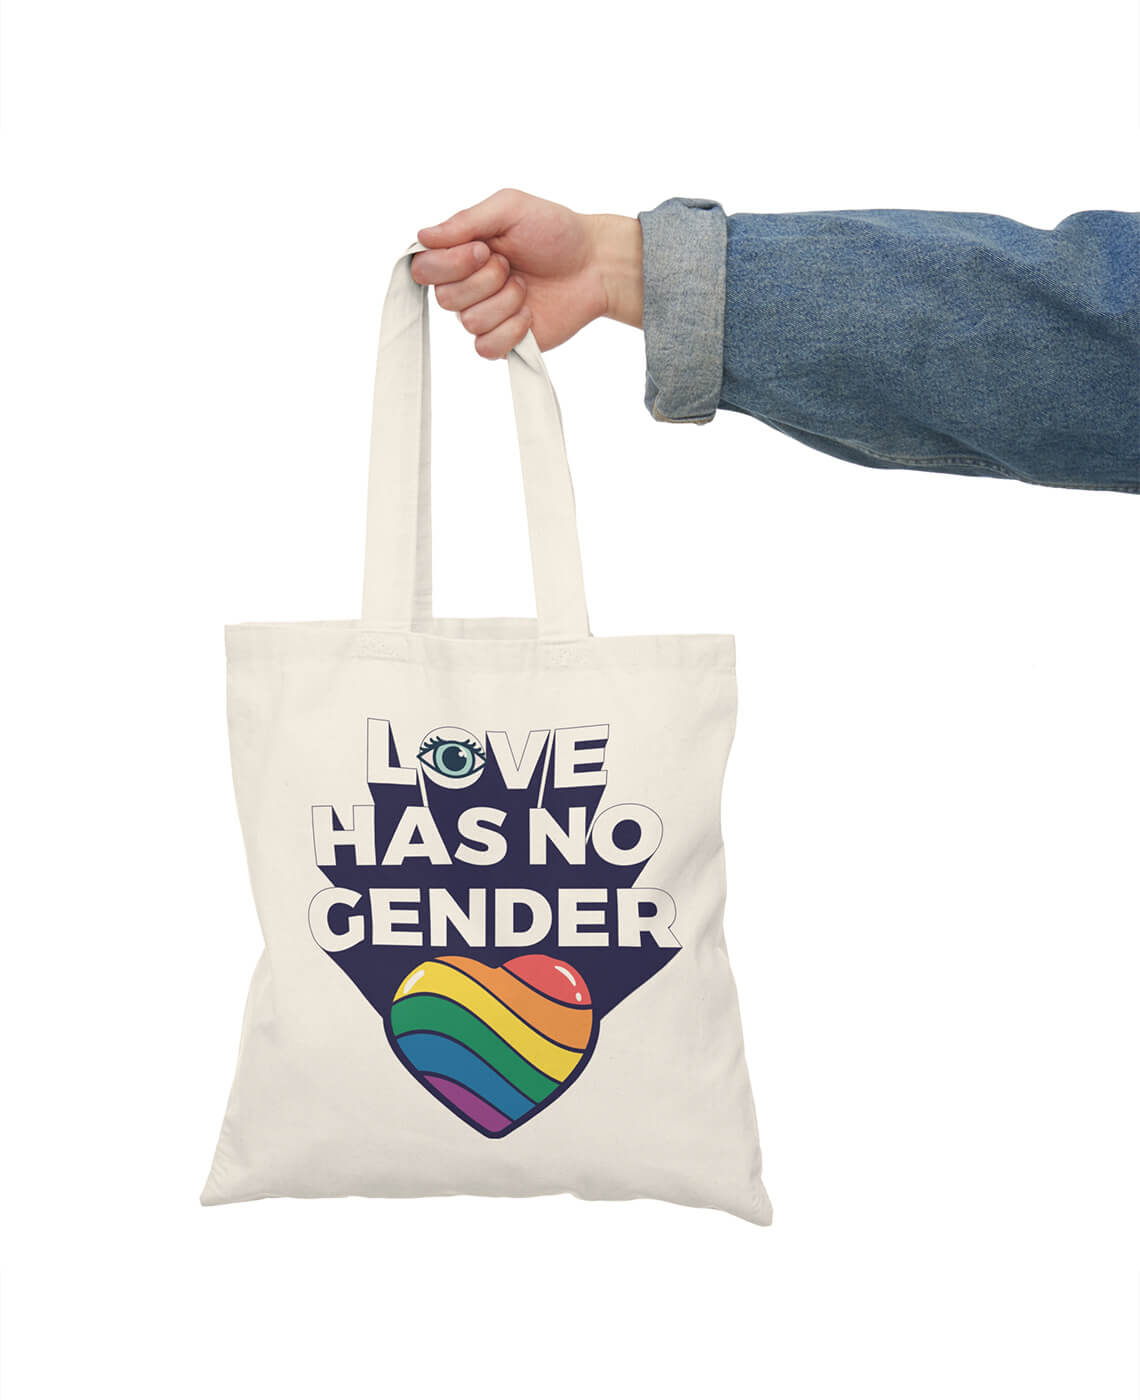 No Gender Canvas Tote Bag One7 Store Canada (3)